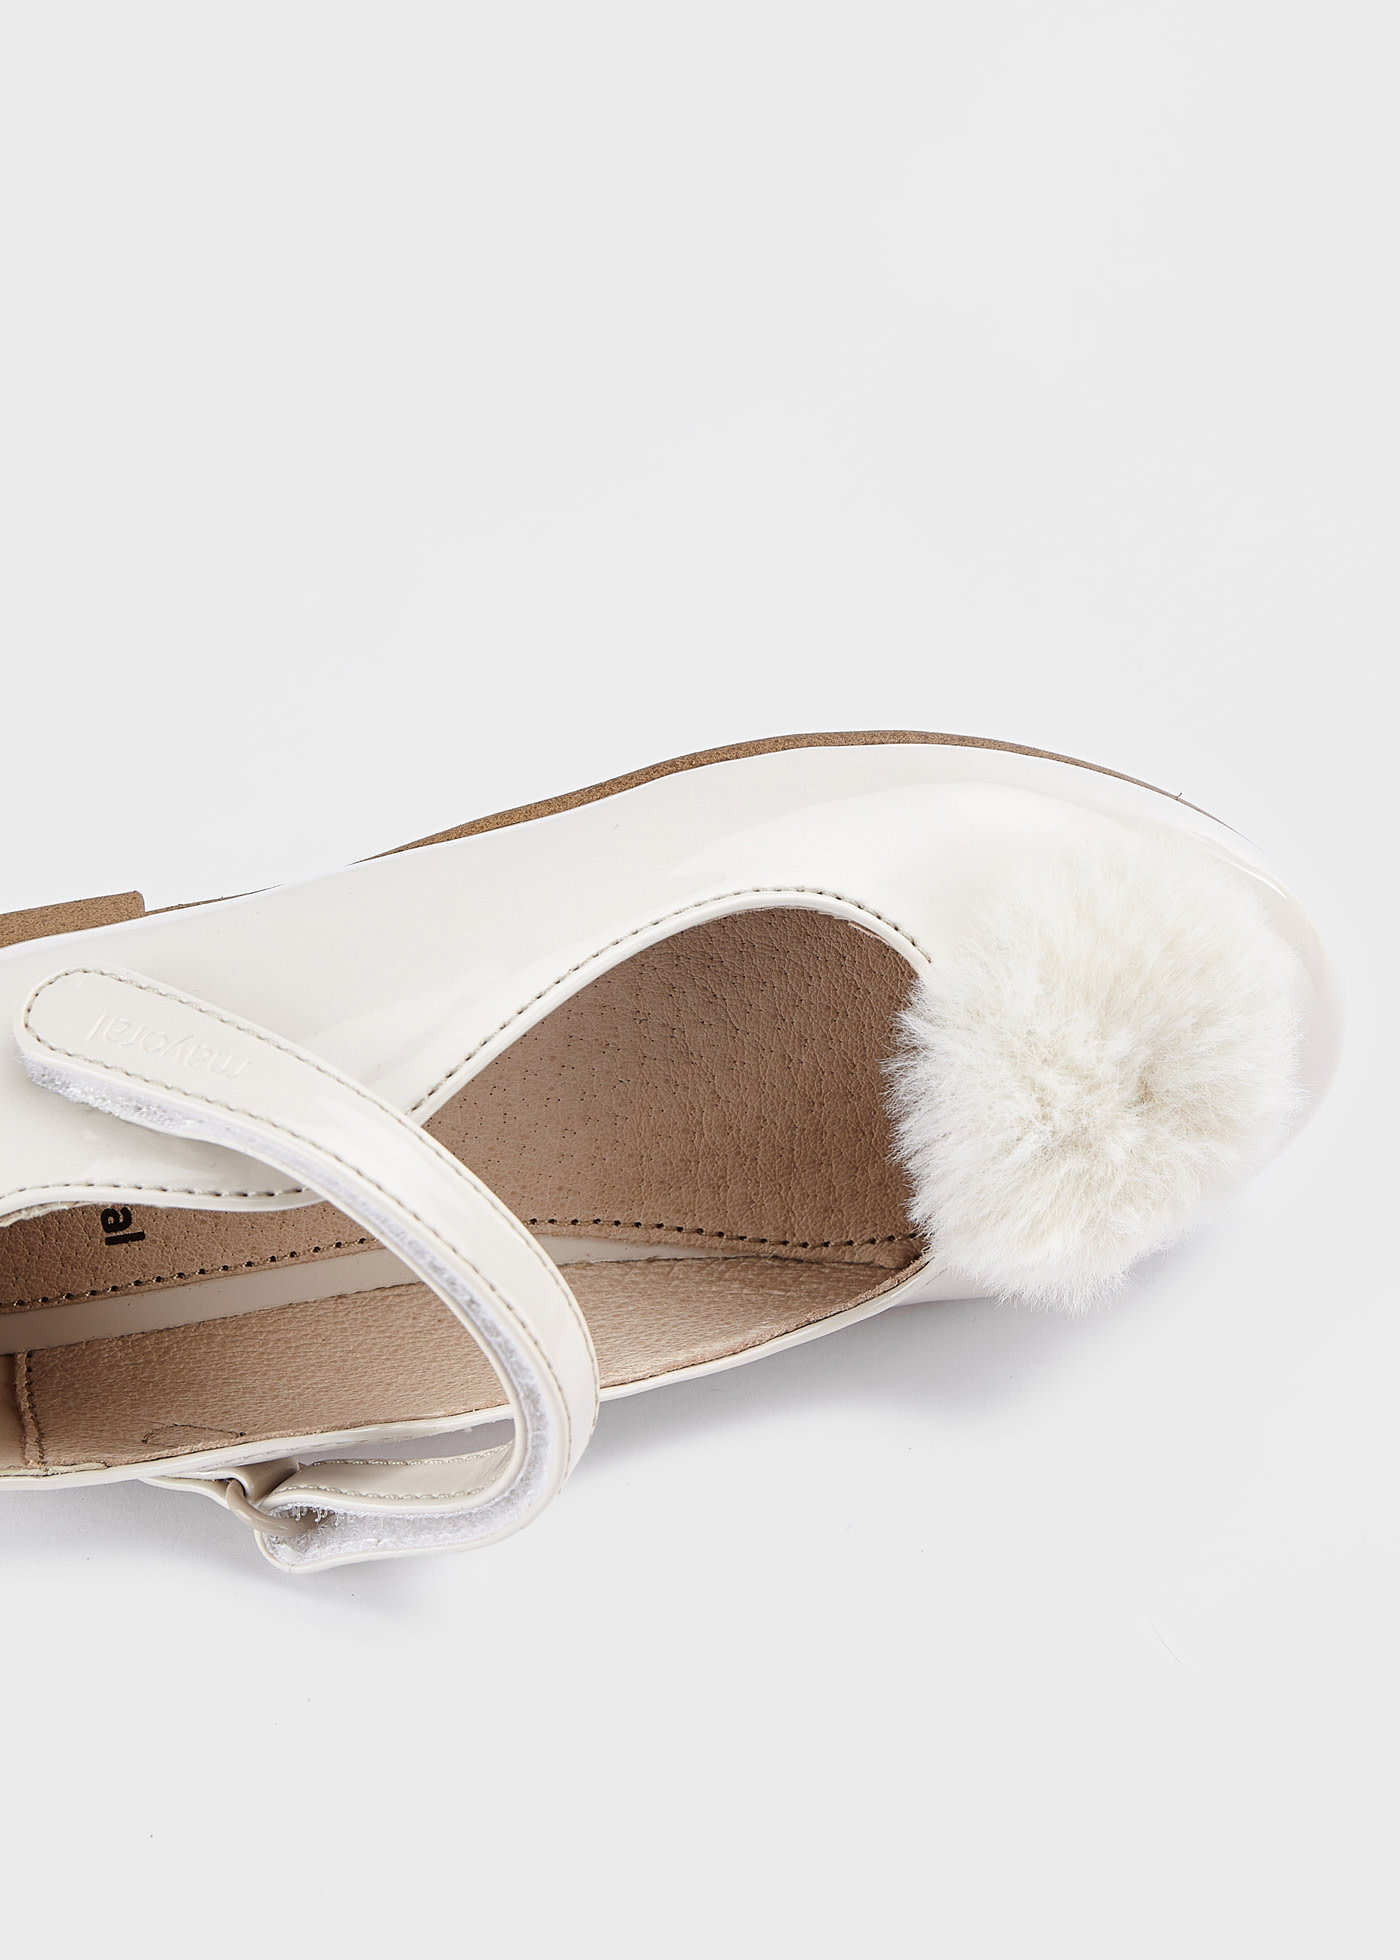 Girl pompom ballet flats sustainable leather